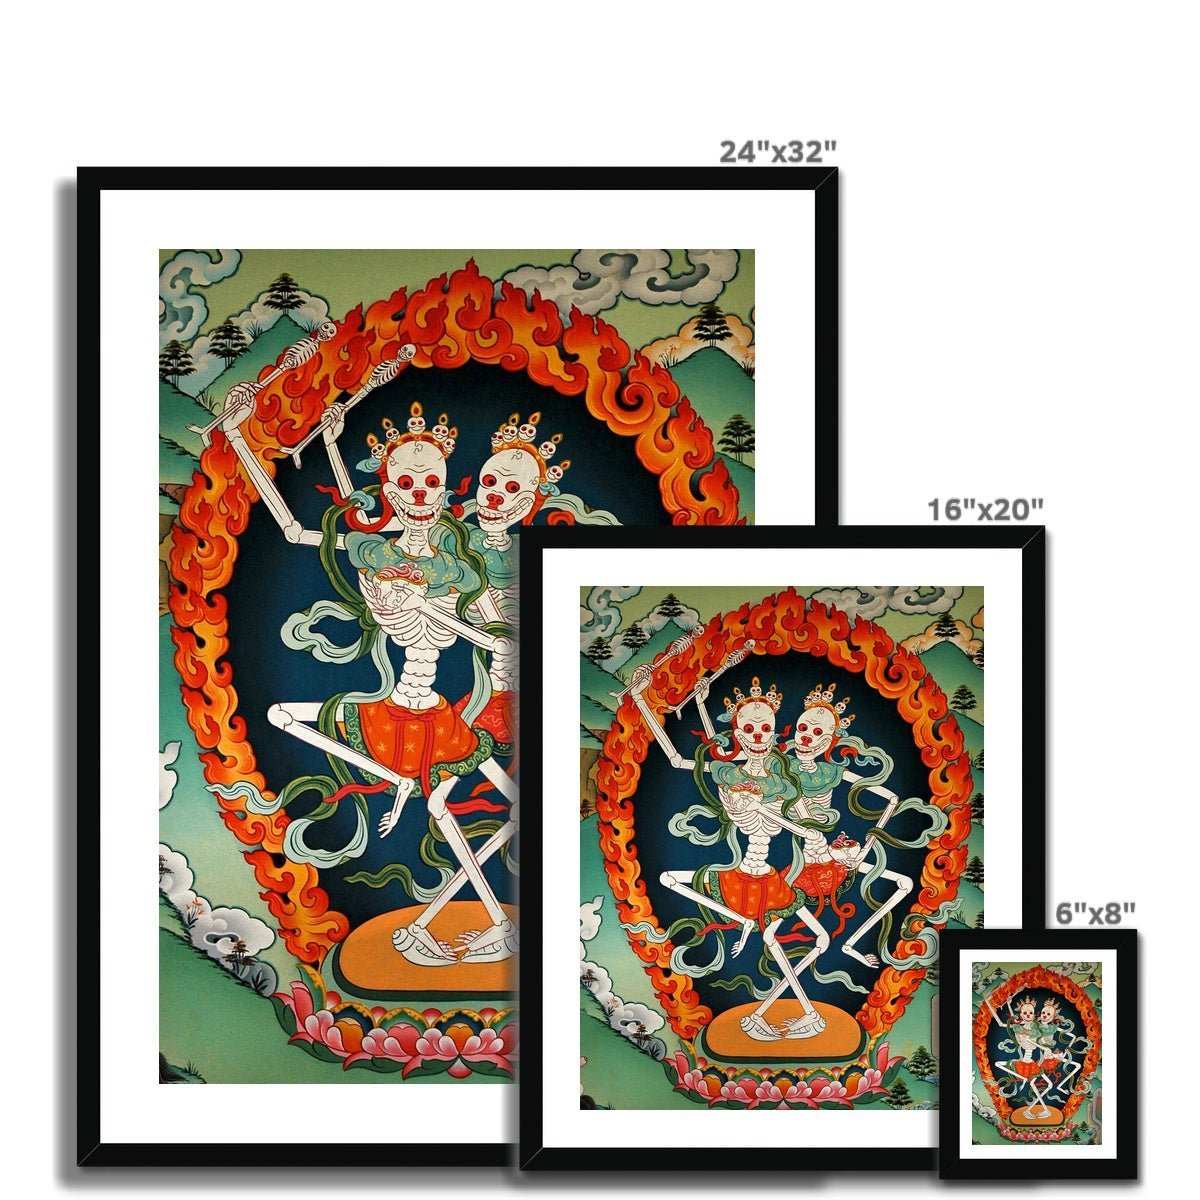 Framed Print Citipati, Tibetan Protector, Thangka, Skeleton Lord and Lady of the Cemetery Nepal Buddhist Decor Wall Art Framed Art Print